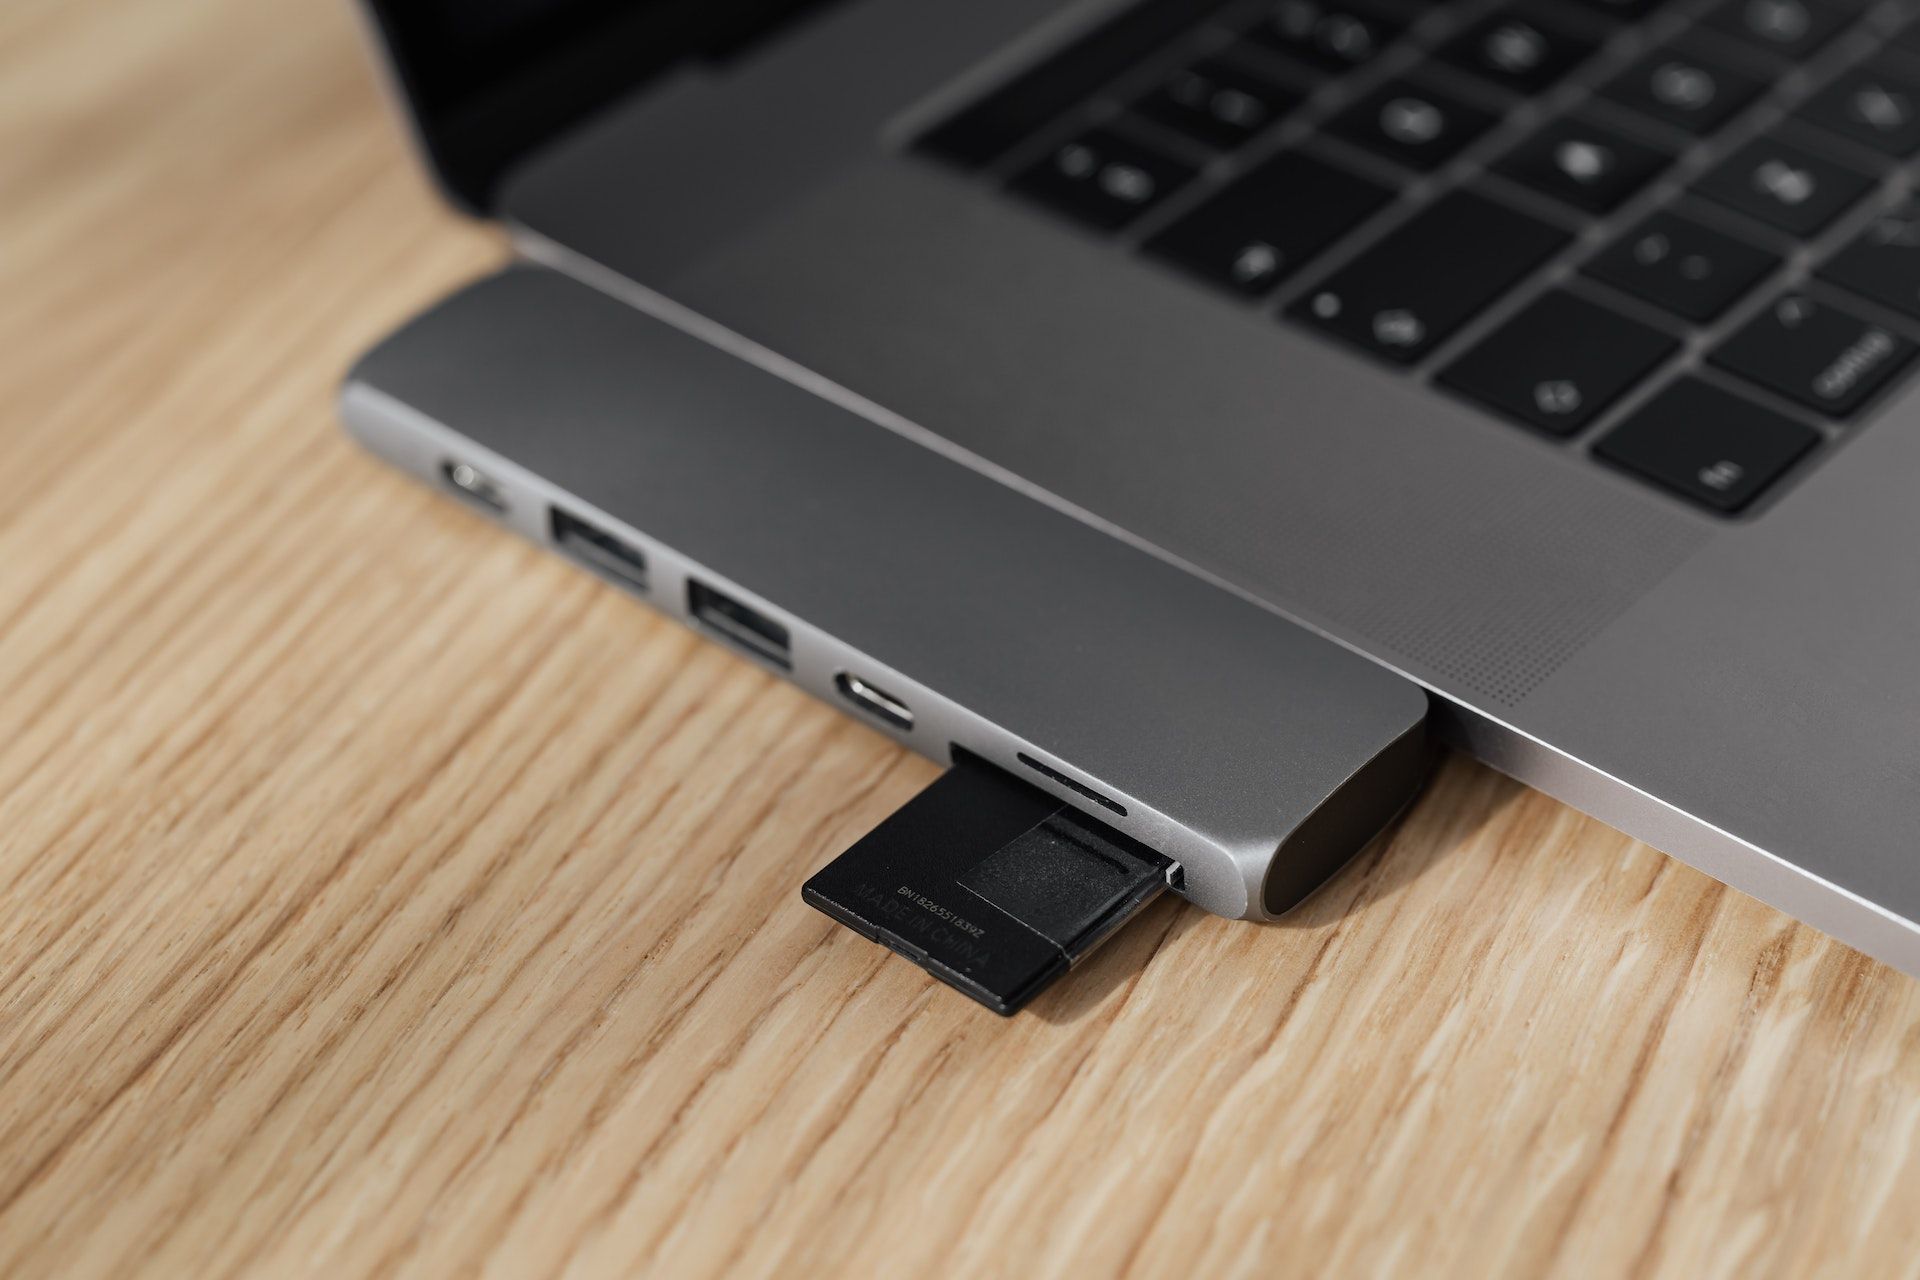 Picrure of USB Card reader in laptop